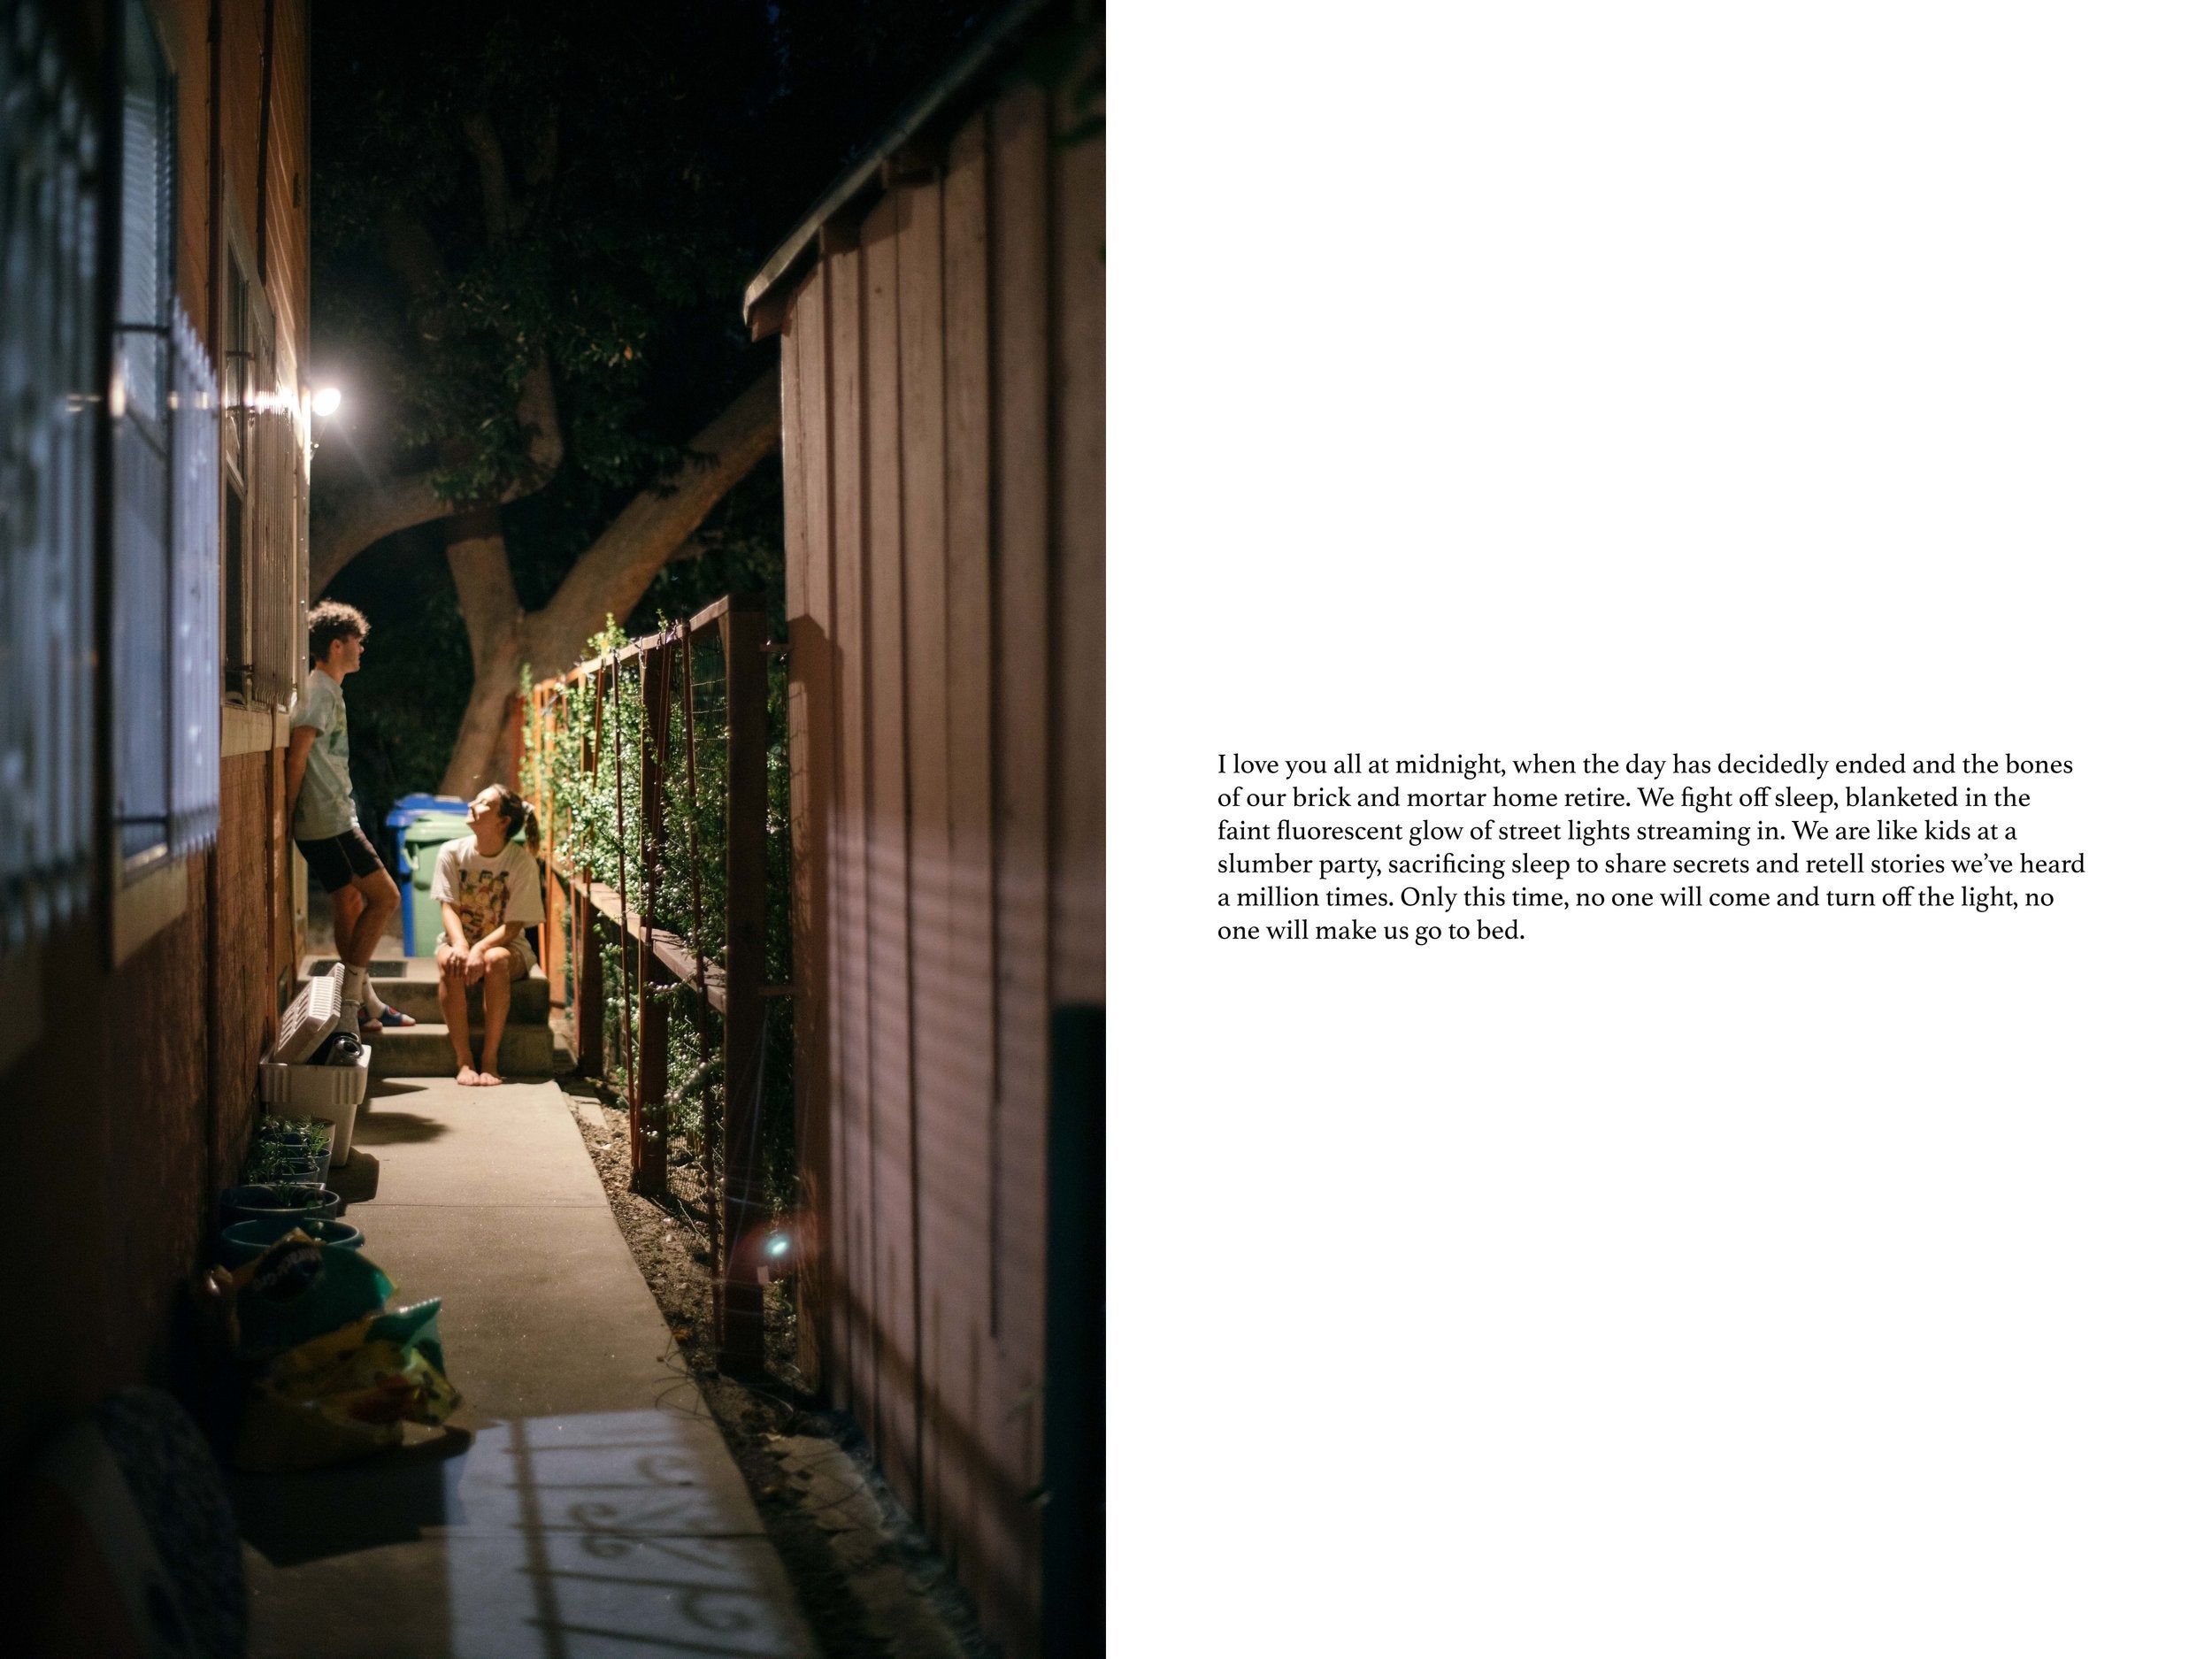 Left: A boy leans against a house while a girl to the right of him sits on steps and looks at him. Right: "I love you all at midnight, when the day has decidedly ended and the bones of our brick and mortar home retire. We fight off sleep, blanketed in the faint fluorescent glow of street lights streaming in. We are like kids at a slumber part, sacrificing sleep to share secrets and retell stories we've heard a million times. Only this time, no one will come and turn off the light, no one will make us go to bed."